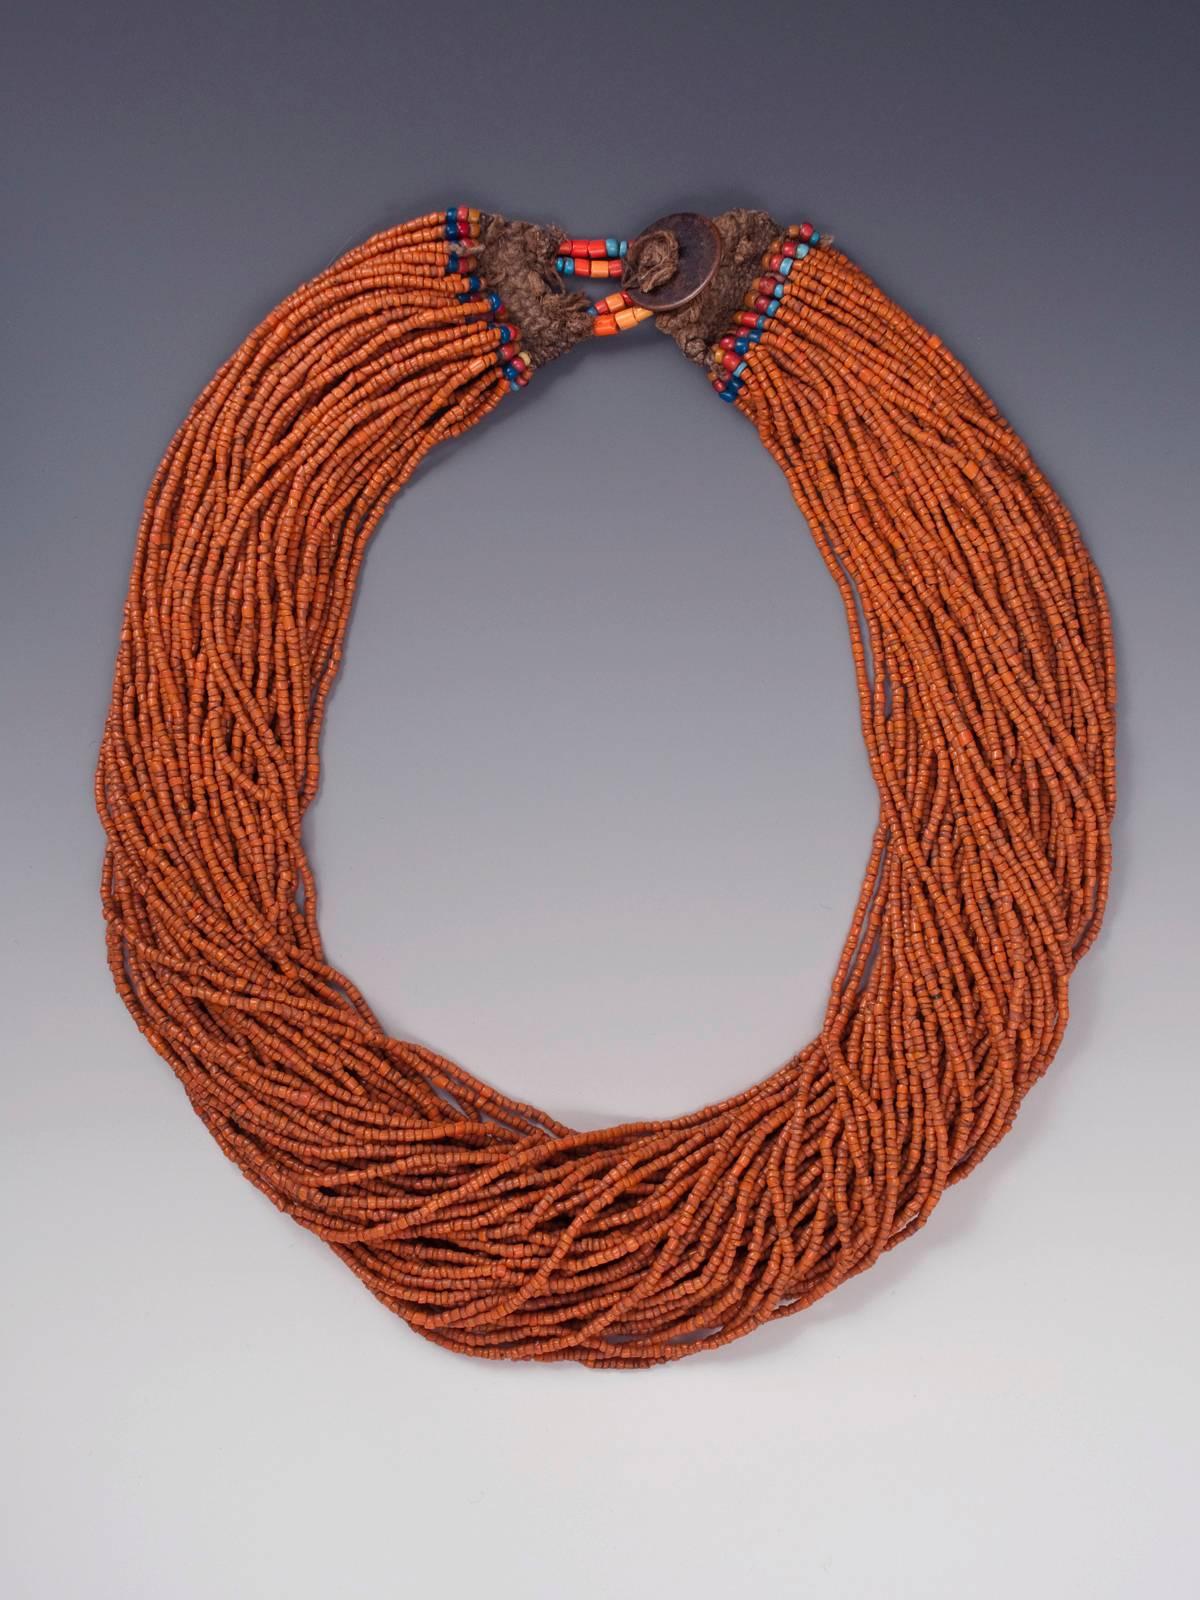 Offered by Zena Kruzick
Early to mid-20th century orange tribal multi-strand beaded Naga necklace, Nagaland, India.
25.5 inches in circumference.
 